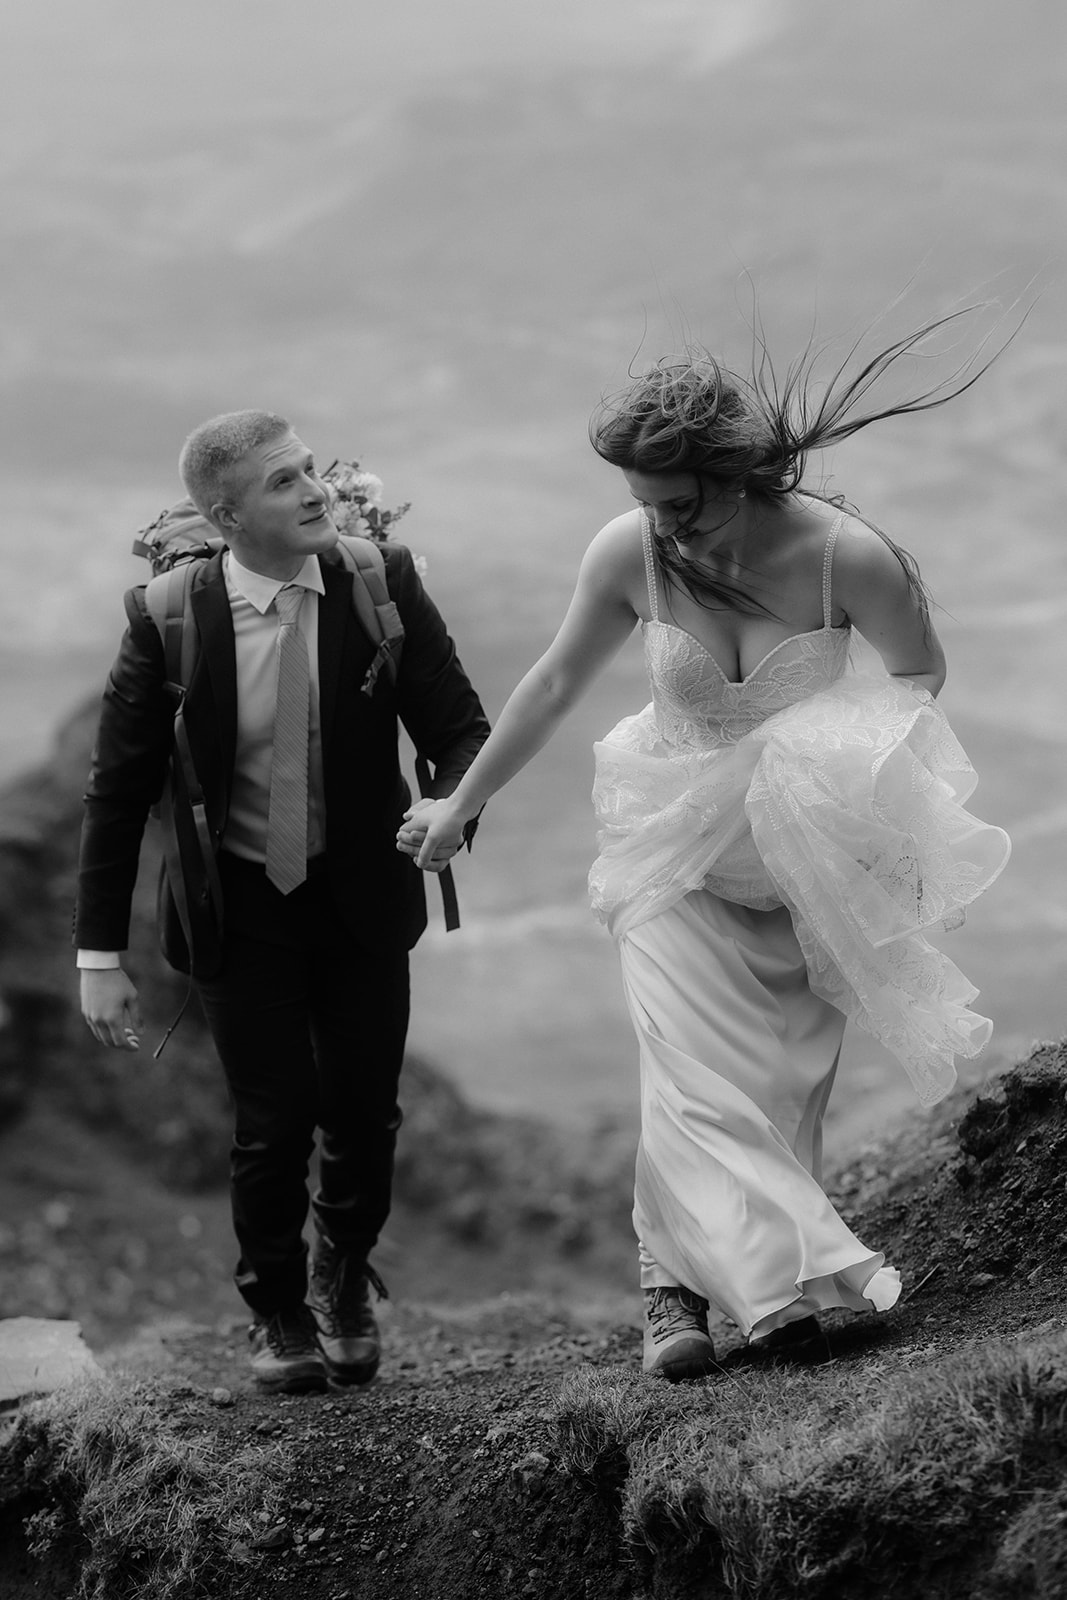 Emma and Matthew embrace a romantic stroll at the Quiraing, Isle of Skye, during their enchanting elopement day.